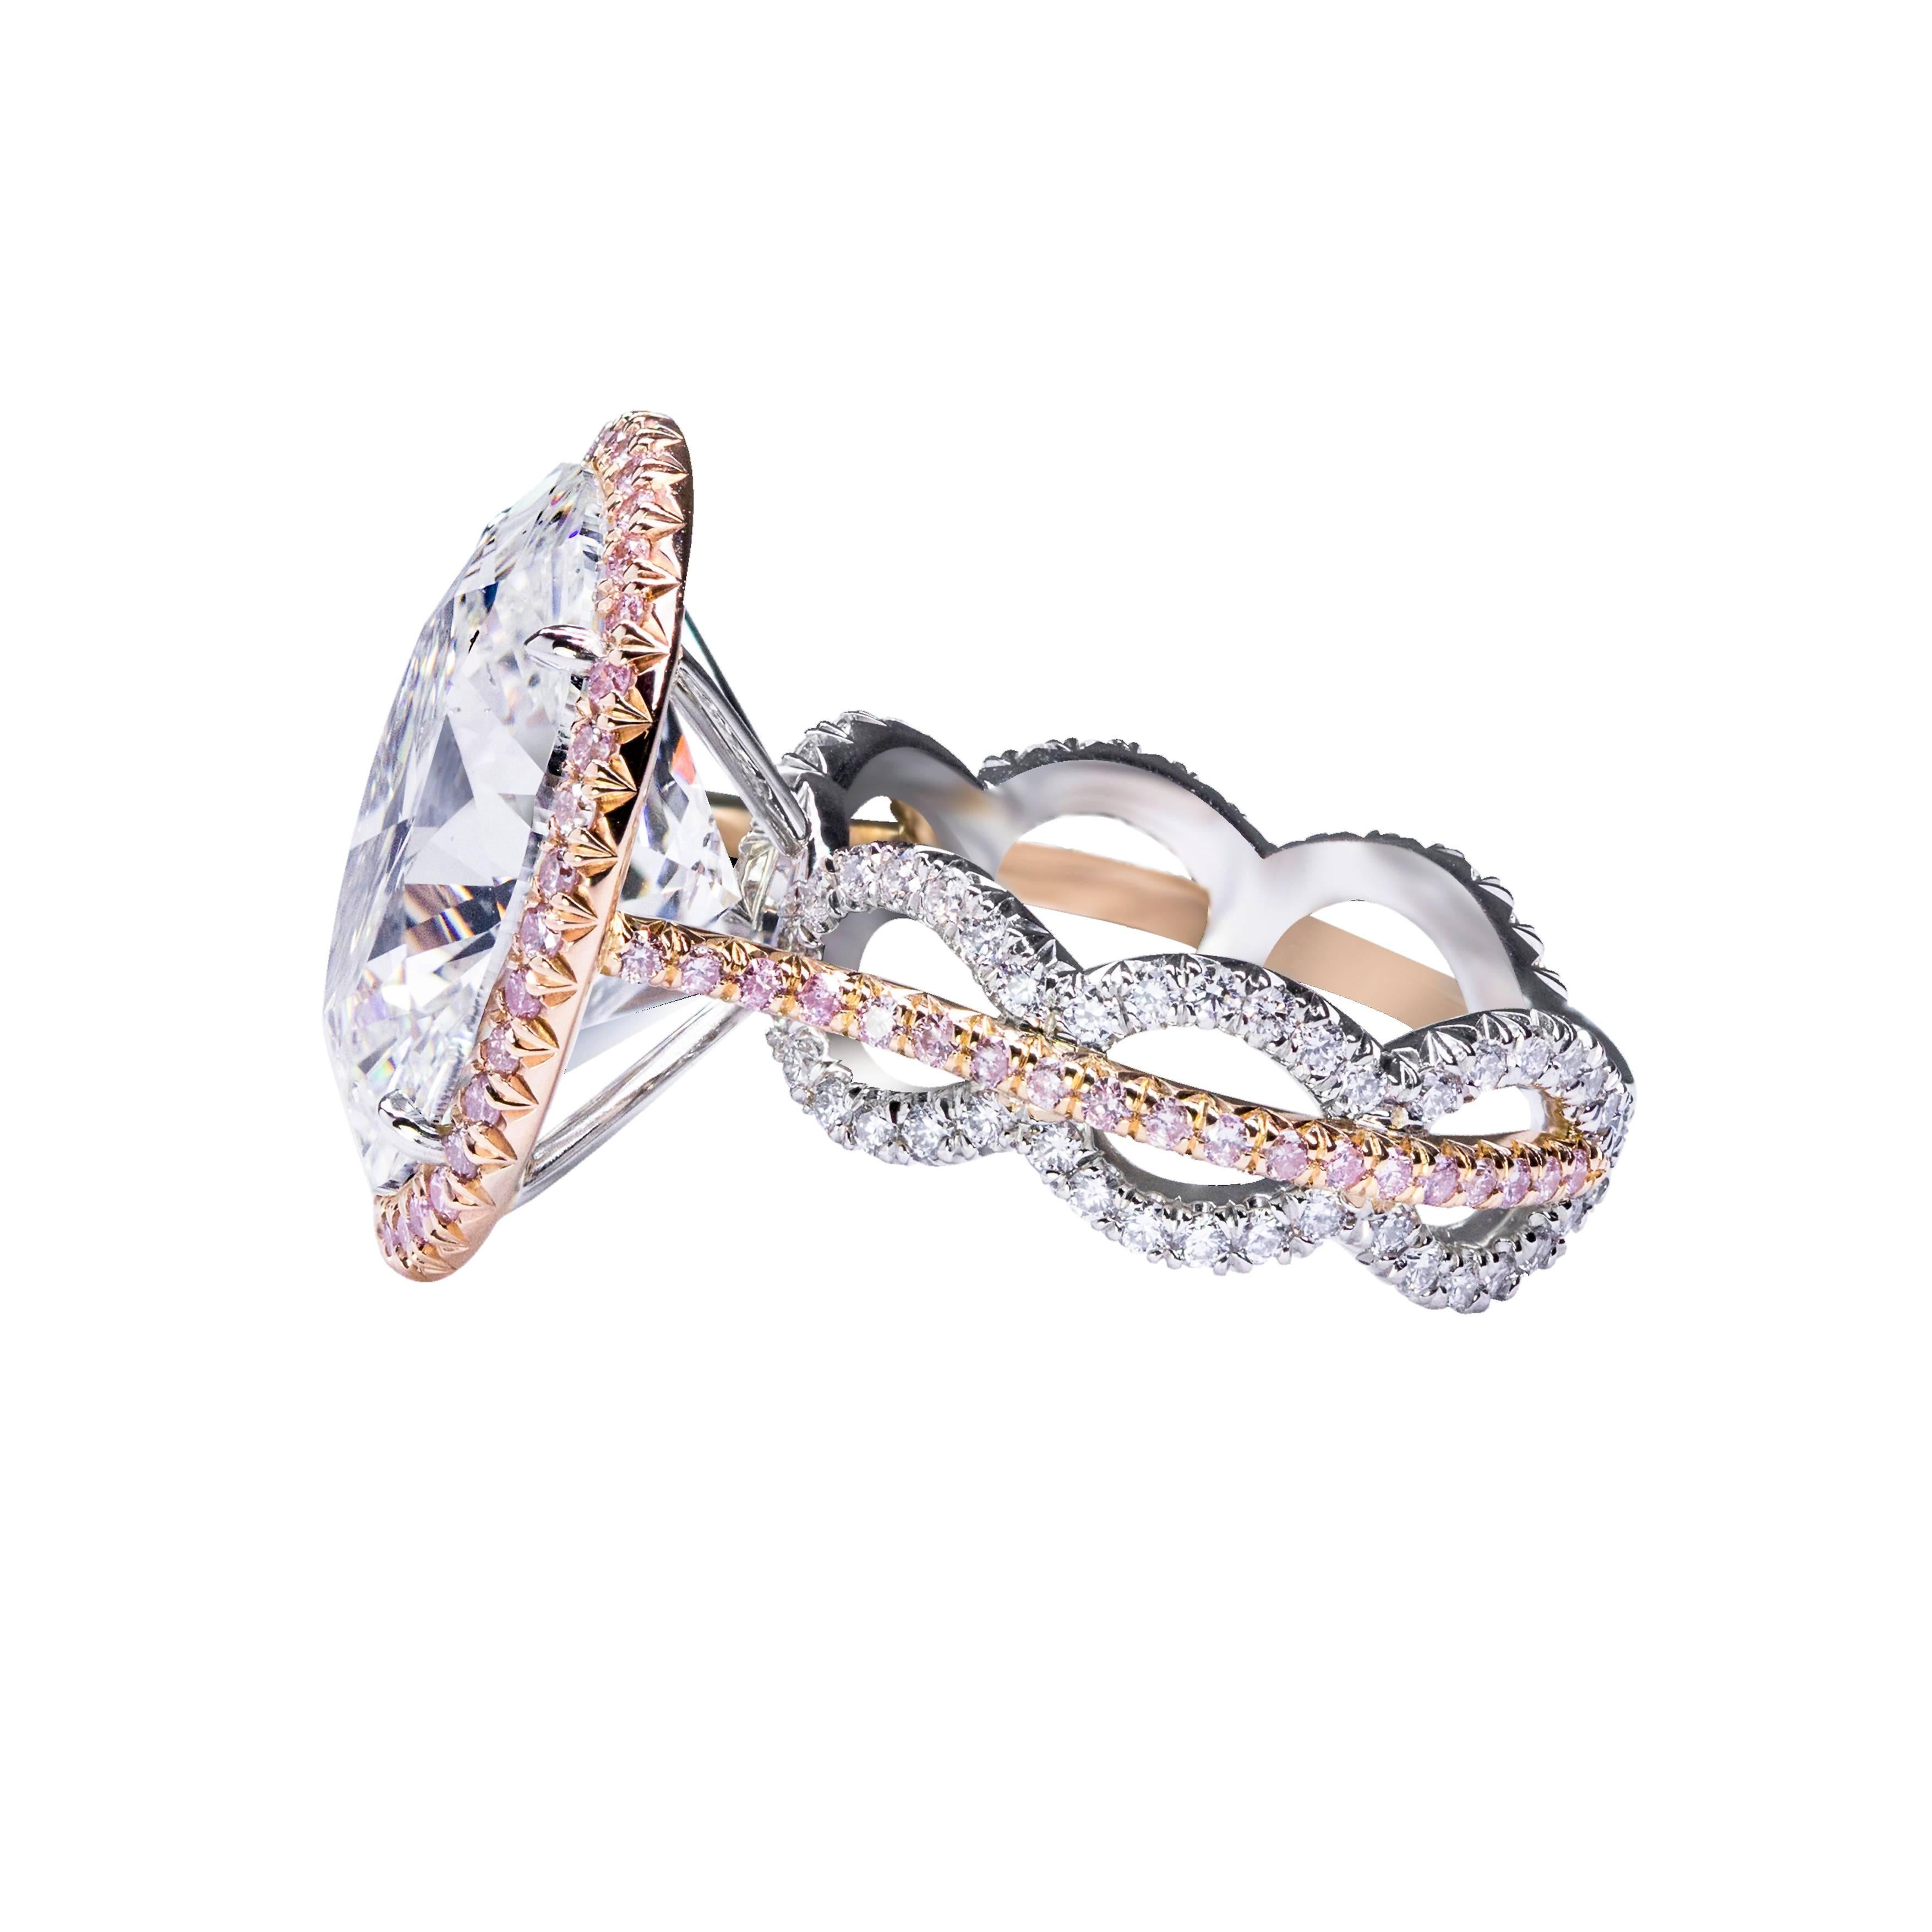 This ring features a 10.03 carat oval cut diamond center stone that HRD certified as D color and SI2 clarity. A single row of round brilliant pink melee diamonds surround the center stone. Set in a creative and intricate three row mounting set with